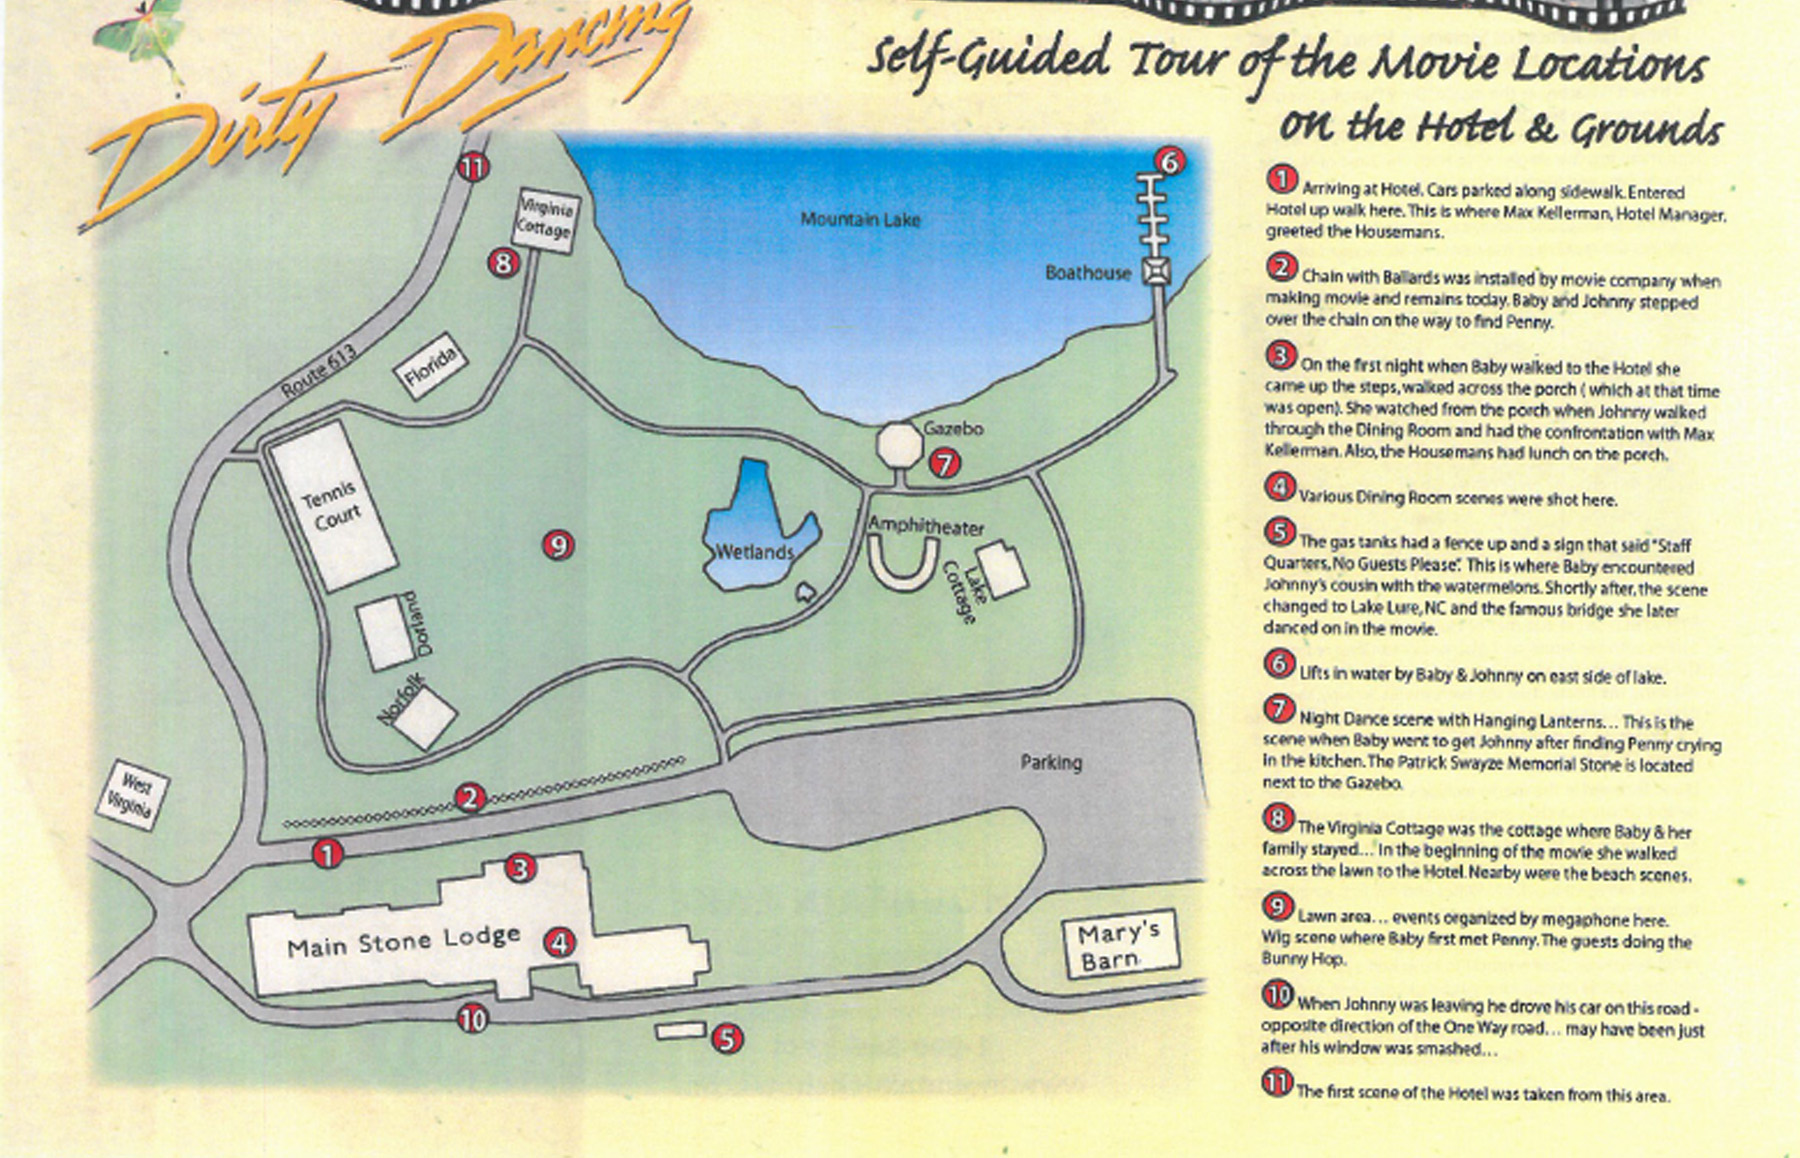 PHOTO: A map showing the grounds of the hotel. Guests can stroll along the lake where Johnny practices the lift that was part of his and Baby's big dance finale performed at the very end of the film.